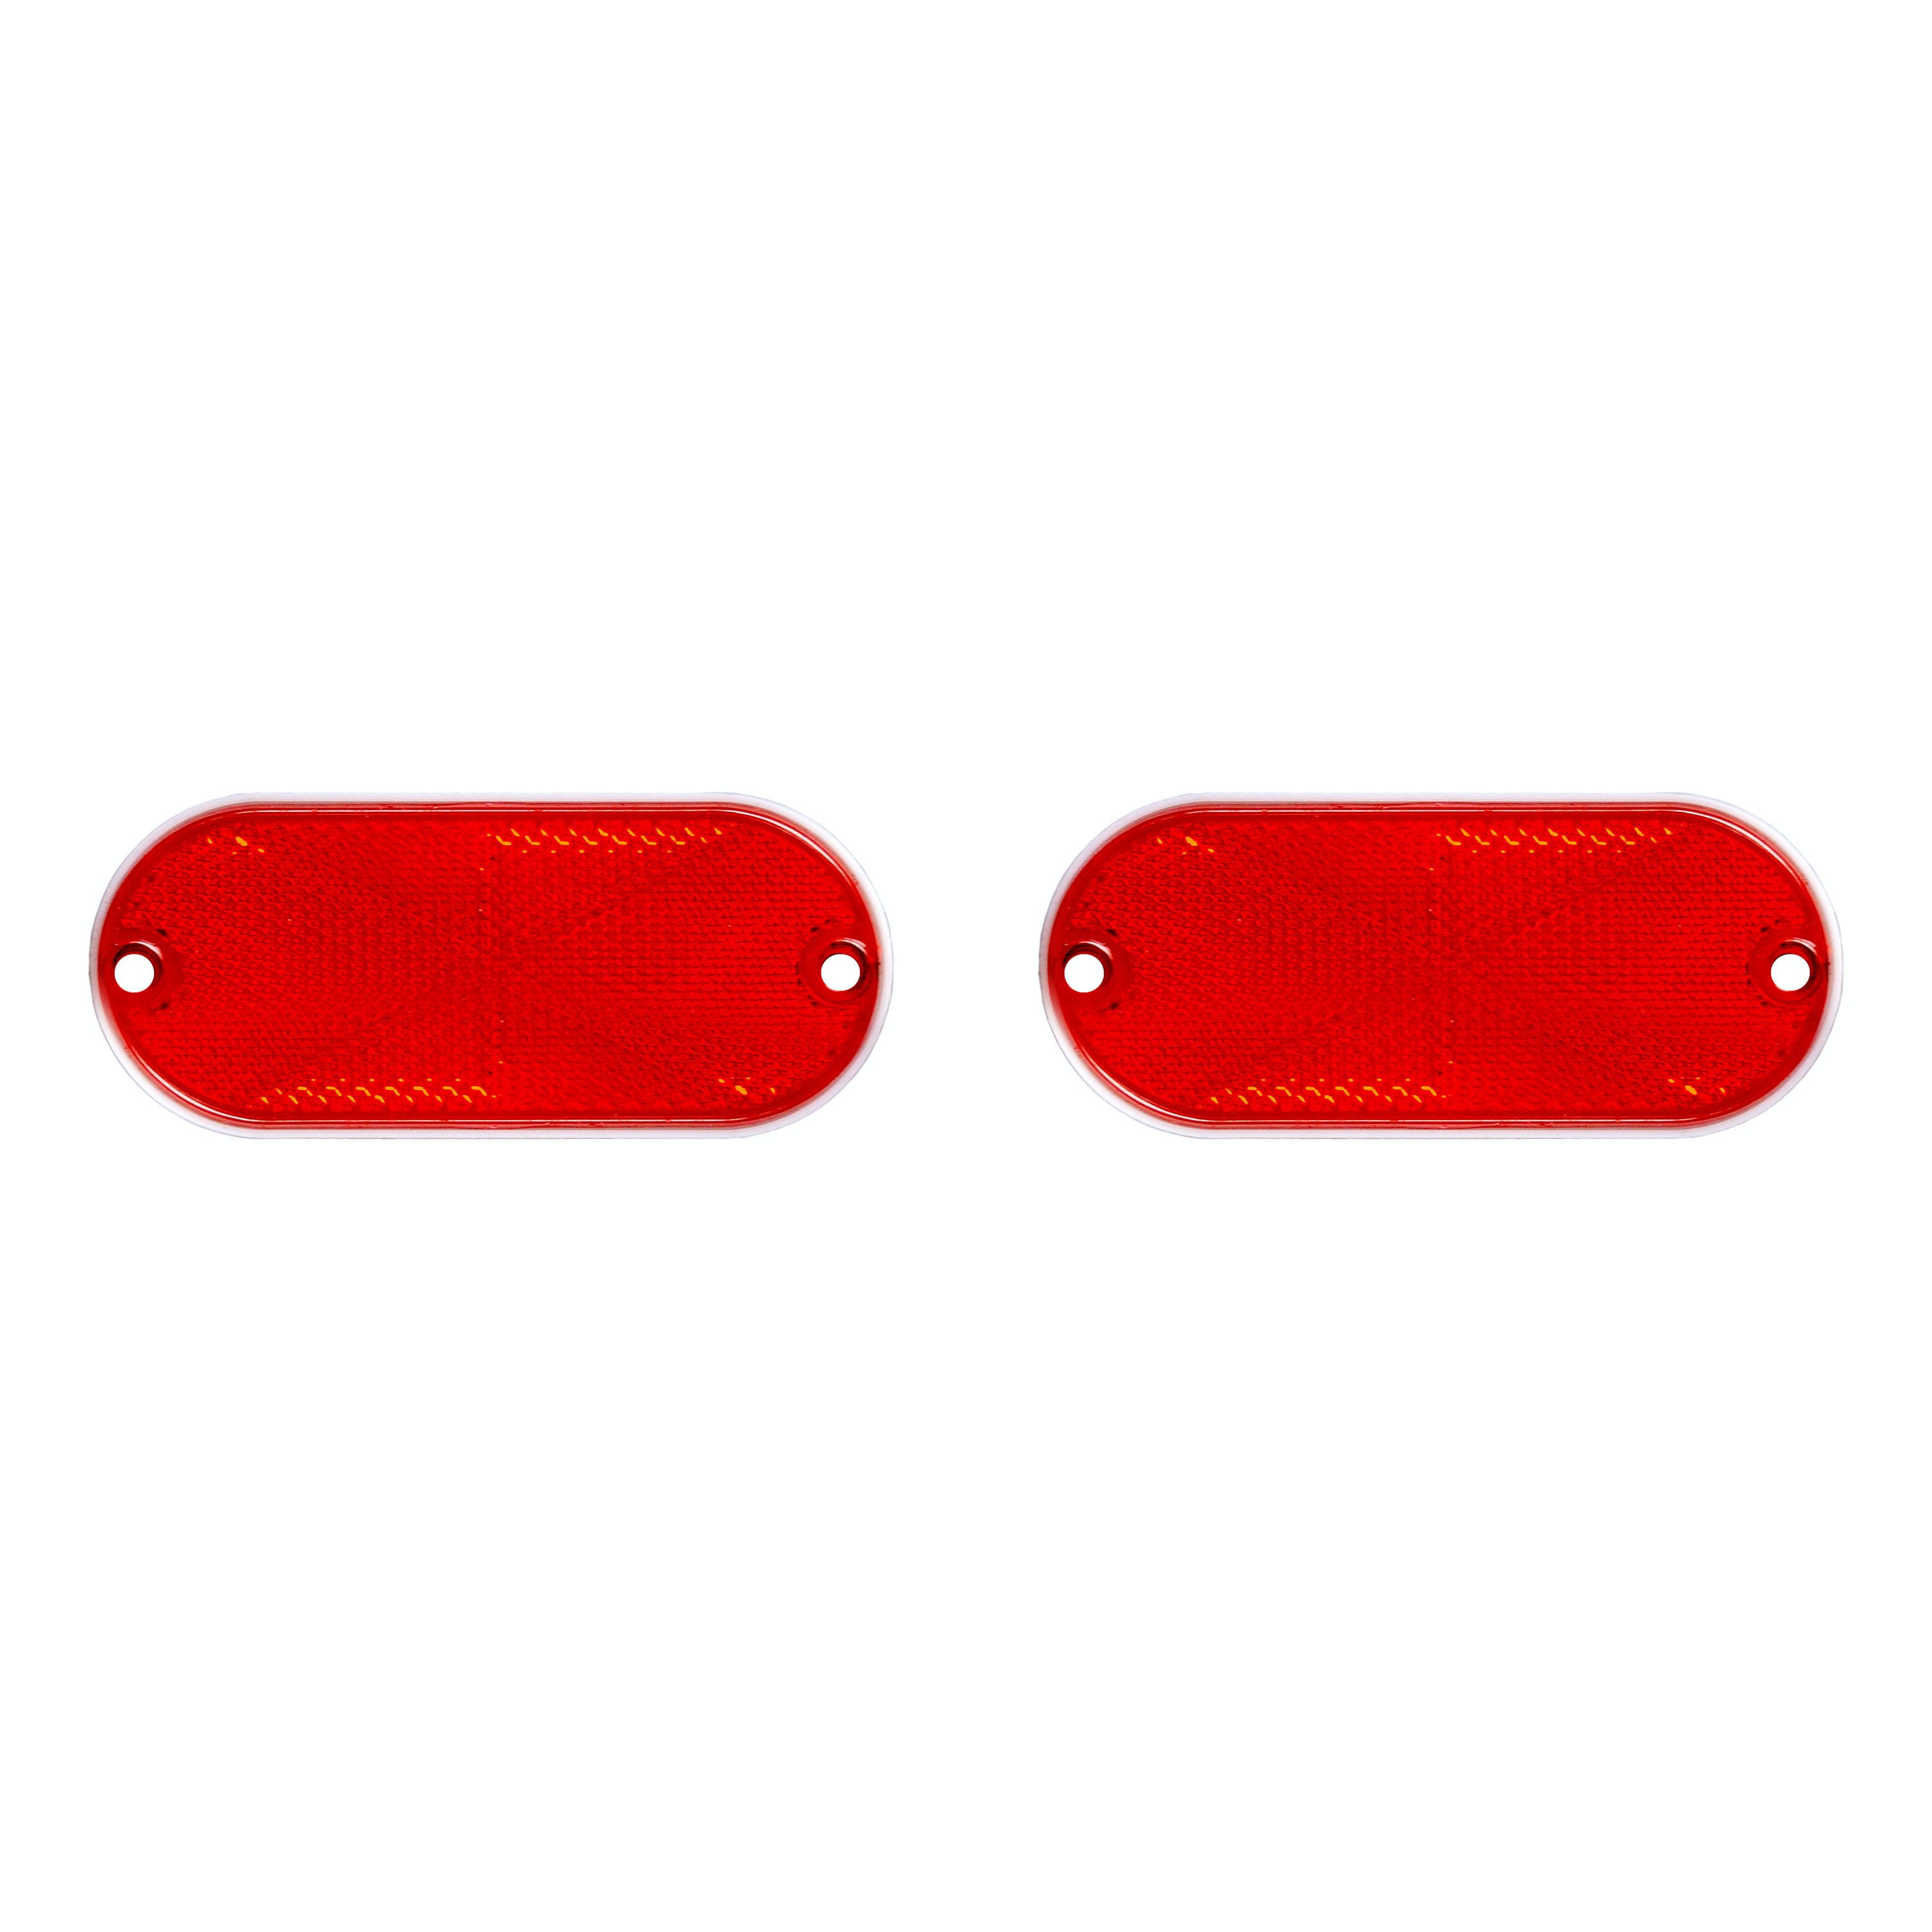 CURT 19234 Replacement 18113 Reflectors for Aluminum Cargo Carrier - 2-Pack